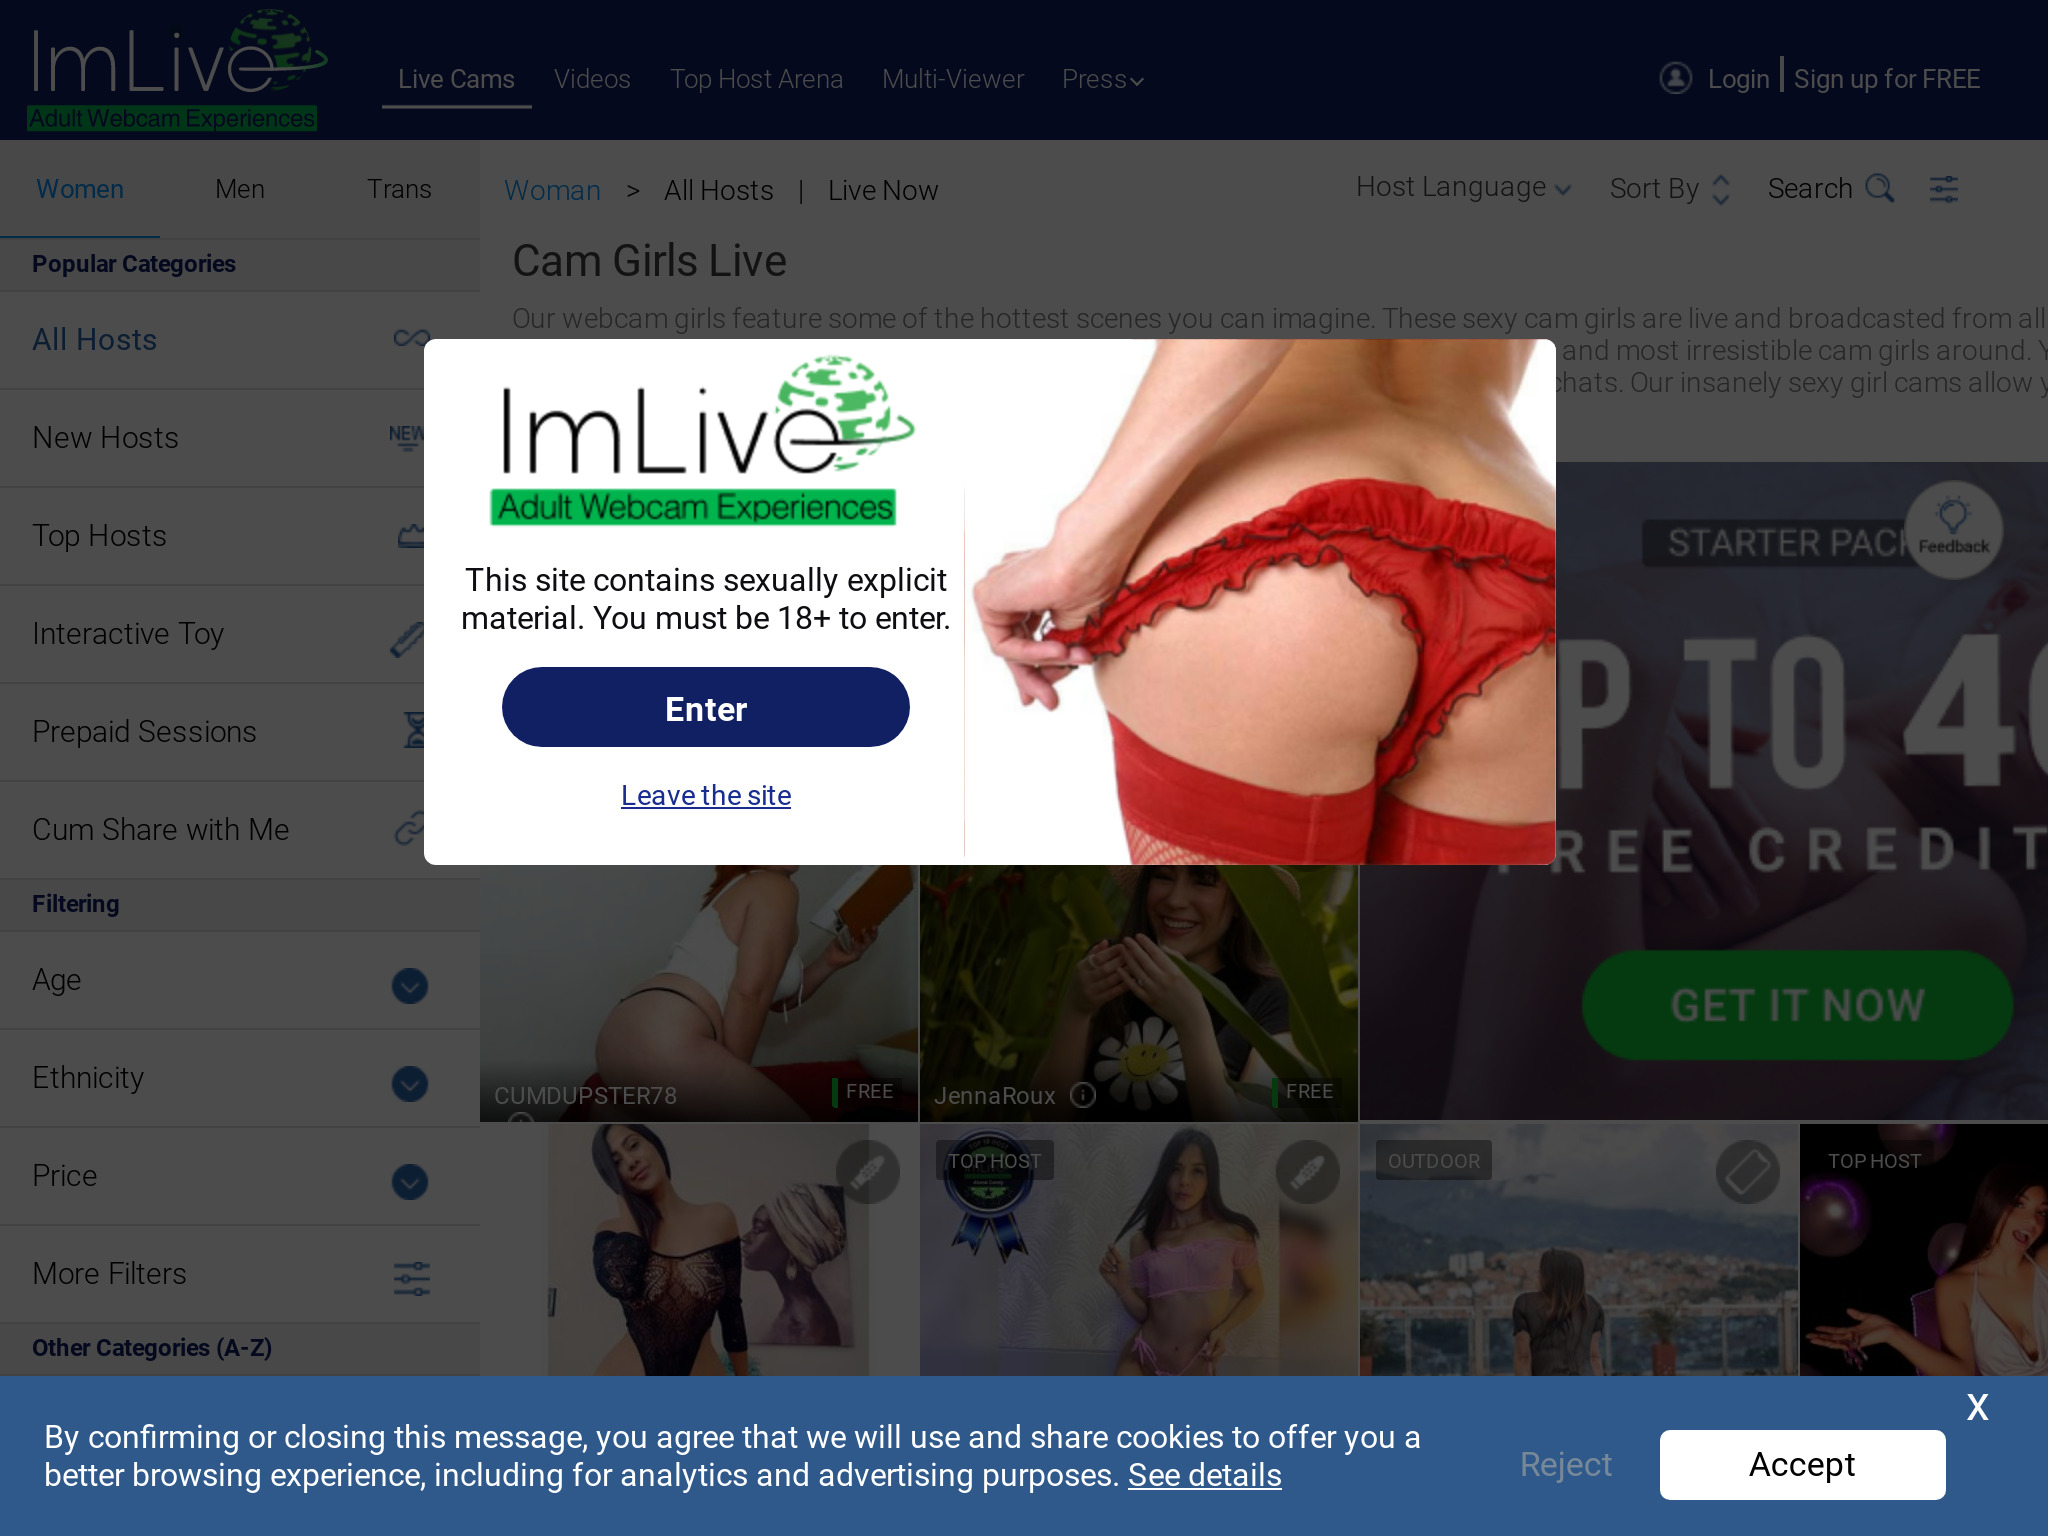 ImLive Review: An In-Depth Look at the Popular Dating Platform